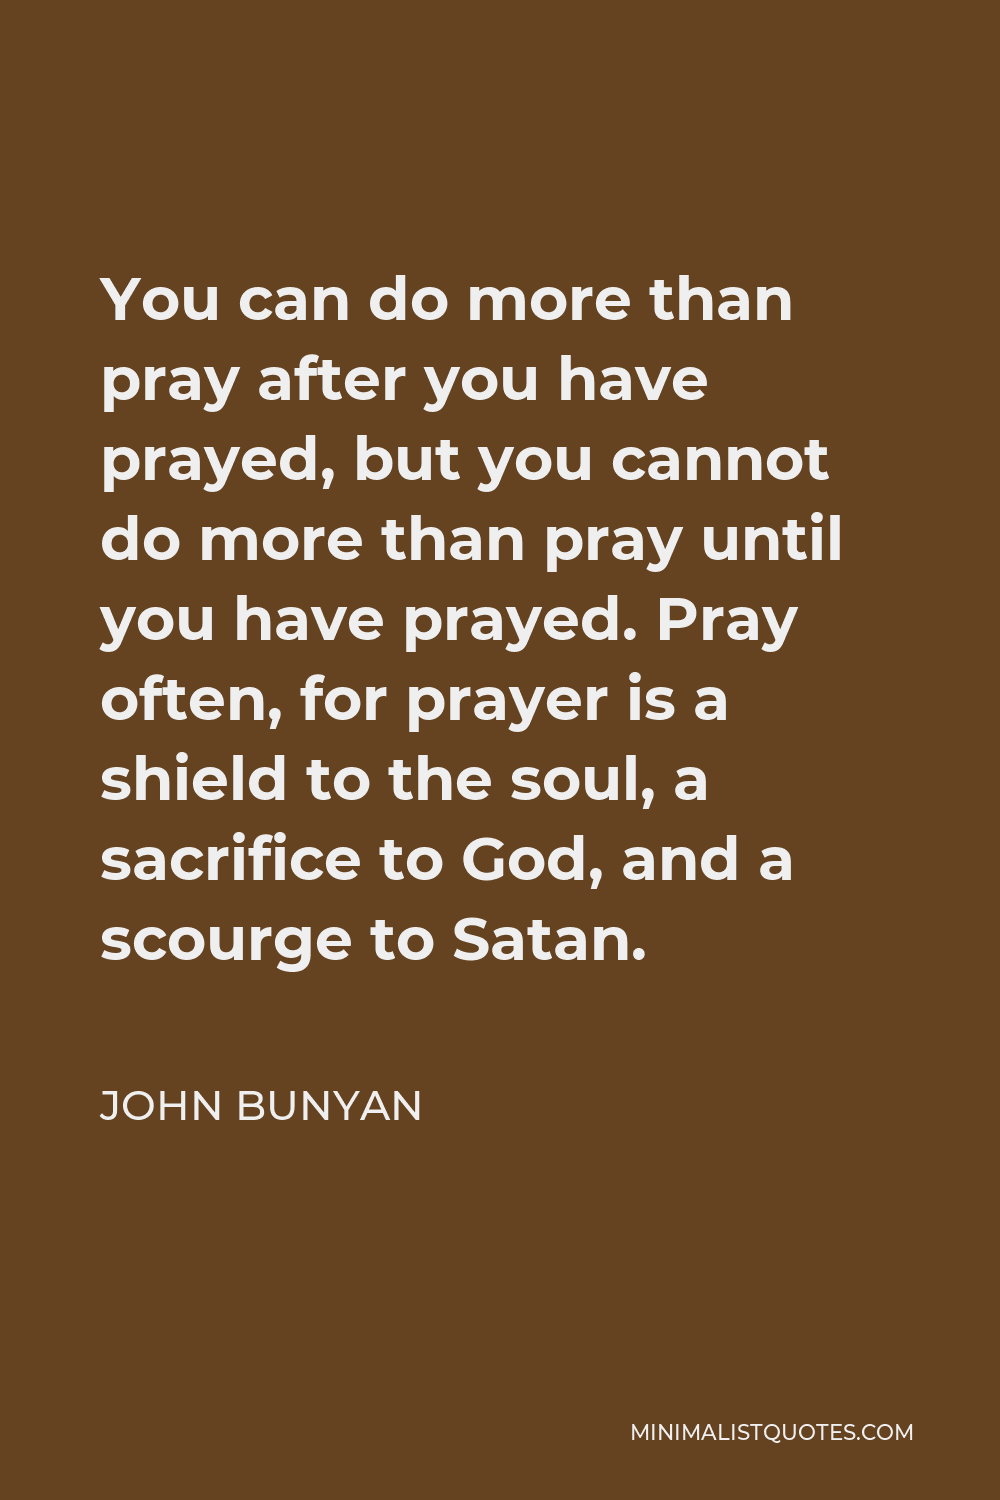 John Bunyan Quote - You can do more than pray after you have prayed, but you cannot do more than pray until you have prayed. Pray often, for prayer is a shield to the soul, a sacrifice to God, and a scourge to Satan.